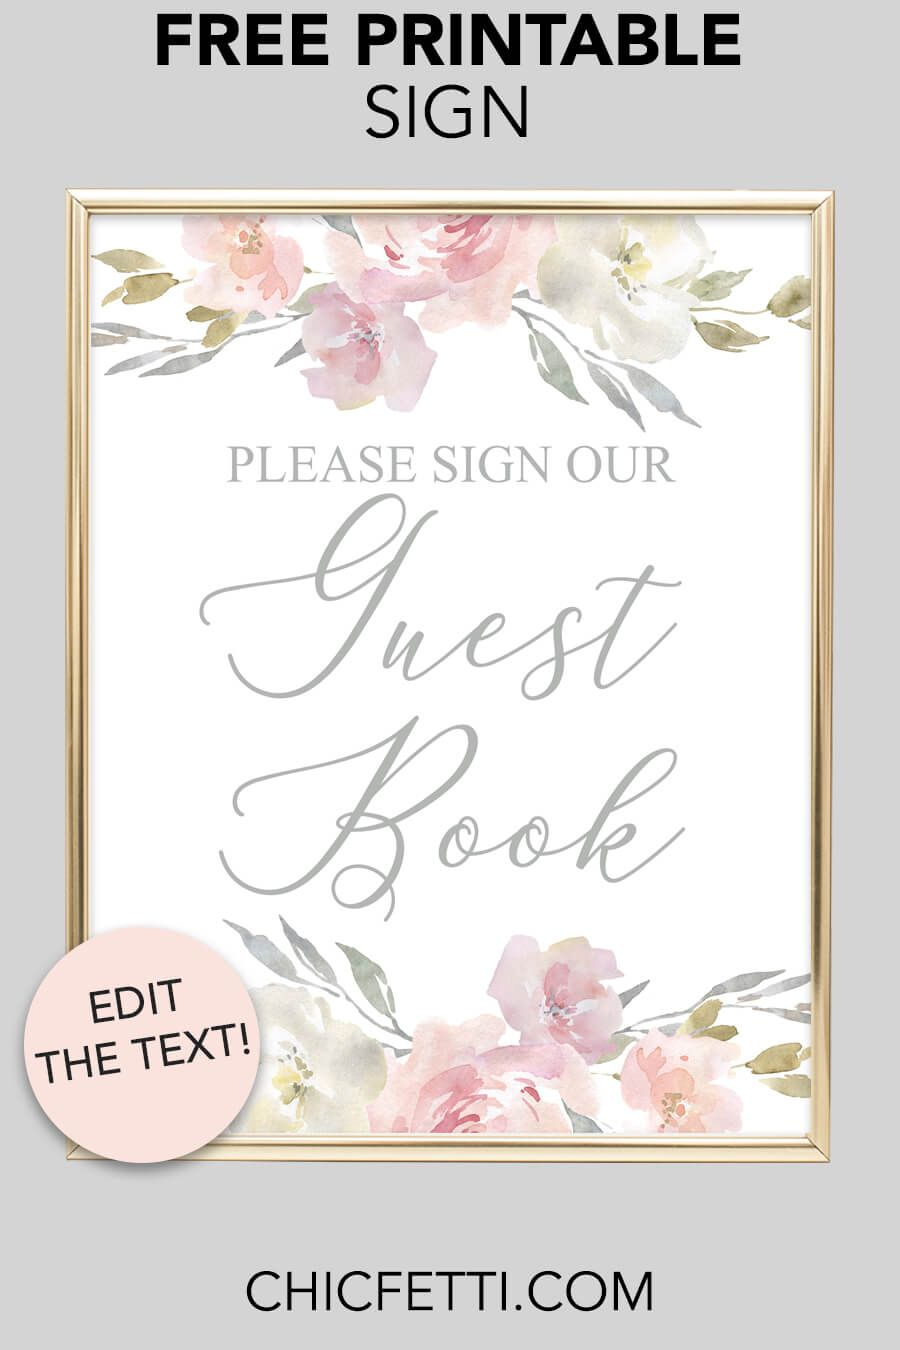 Guest Book Printable Sign (Blush Floral In 2019 | Free Printables - Please Sign Our Guestbook Free Printable